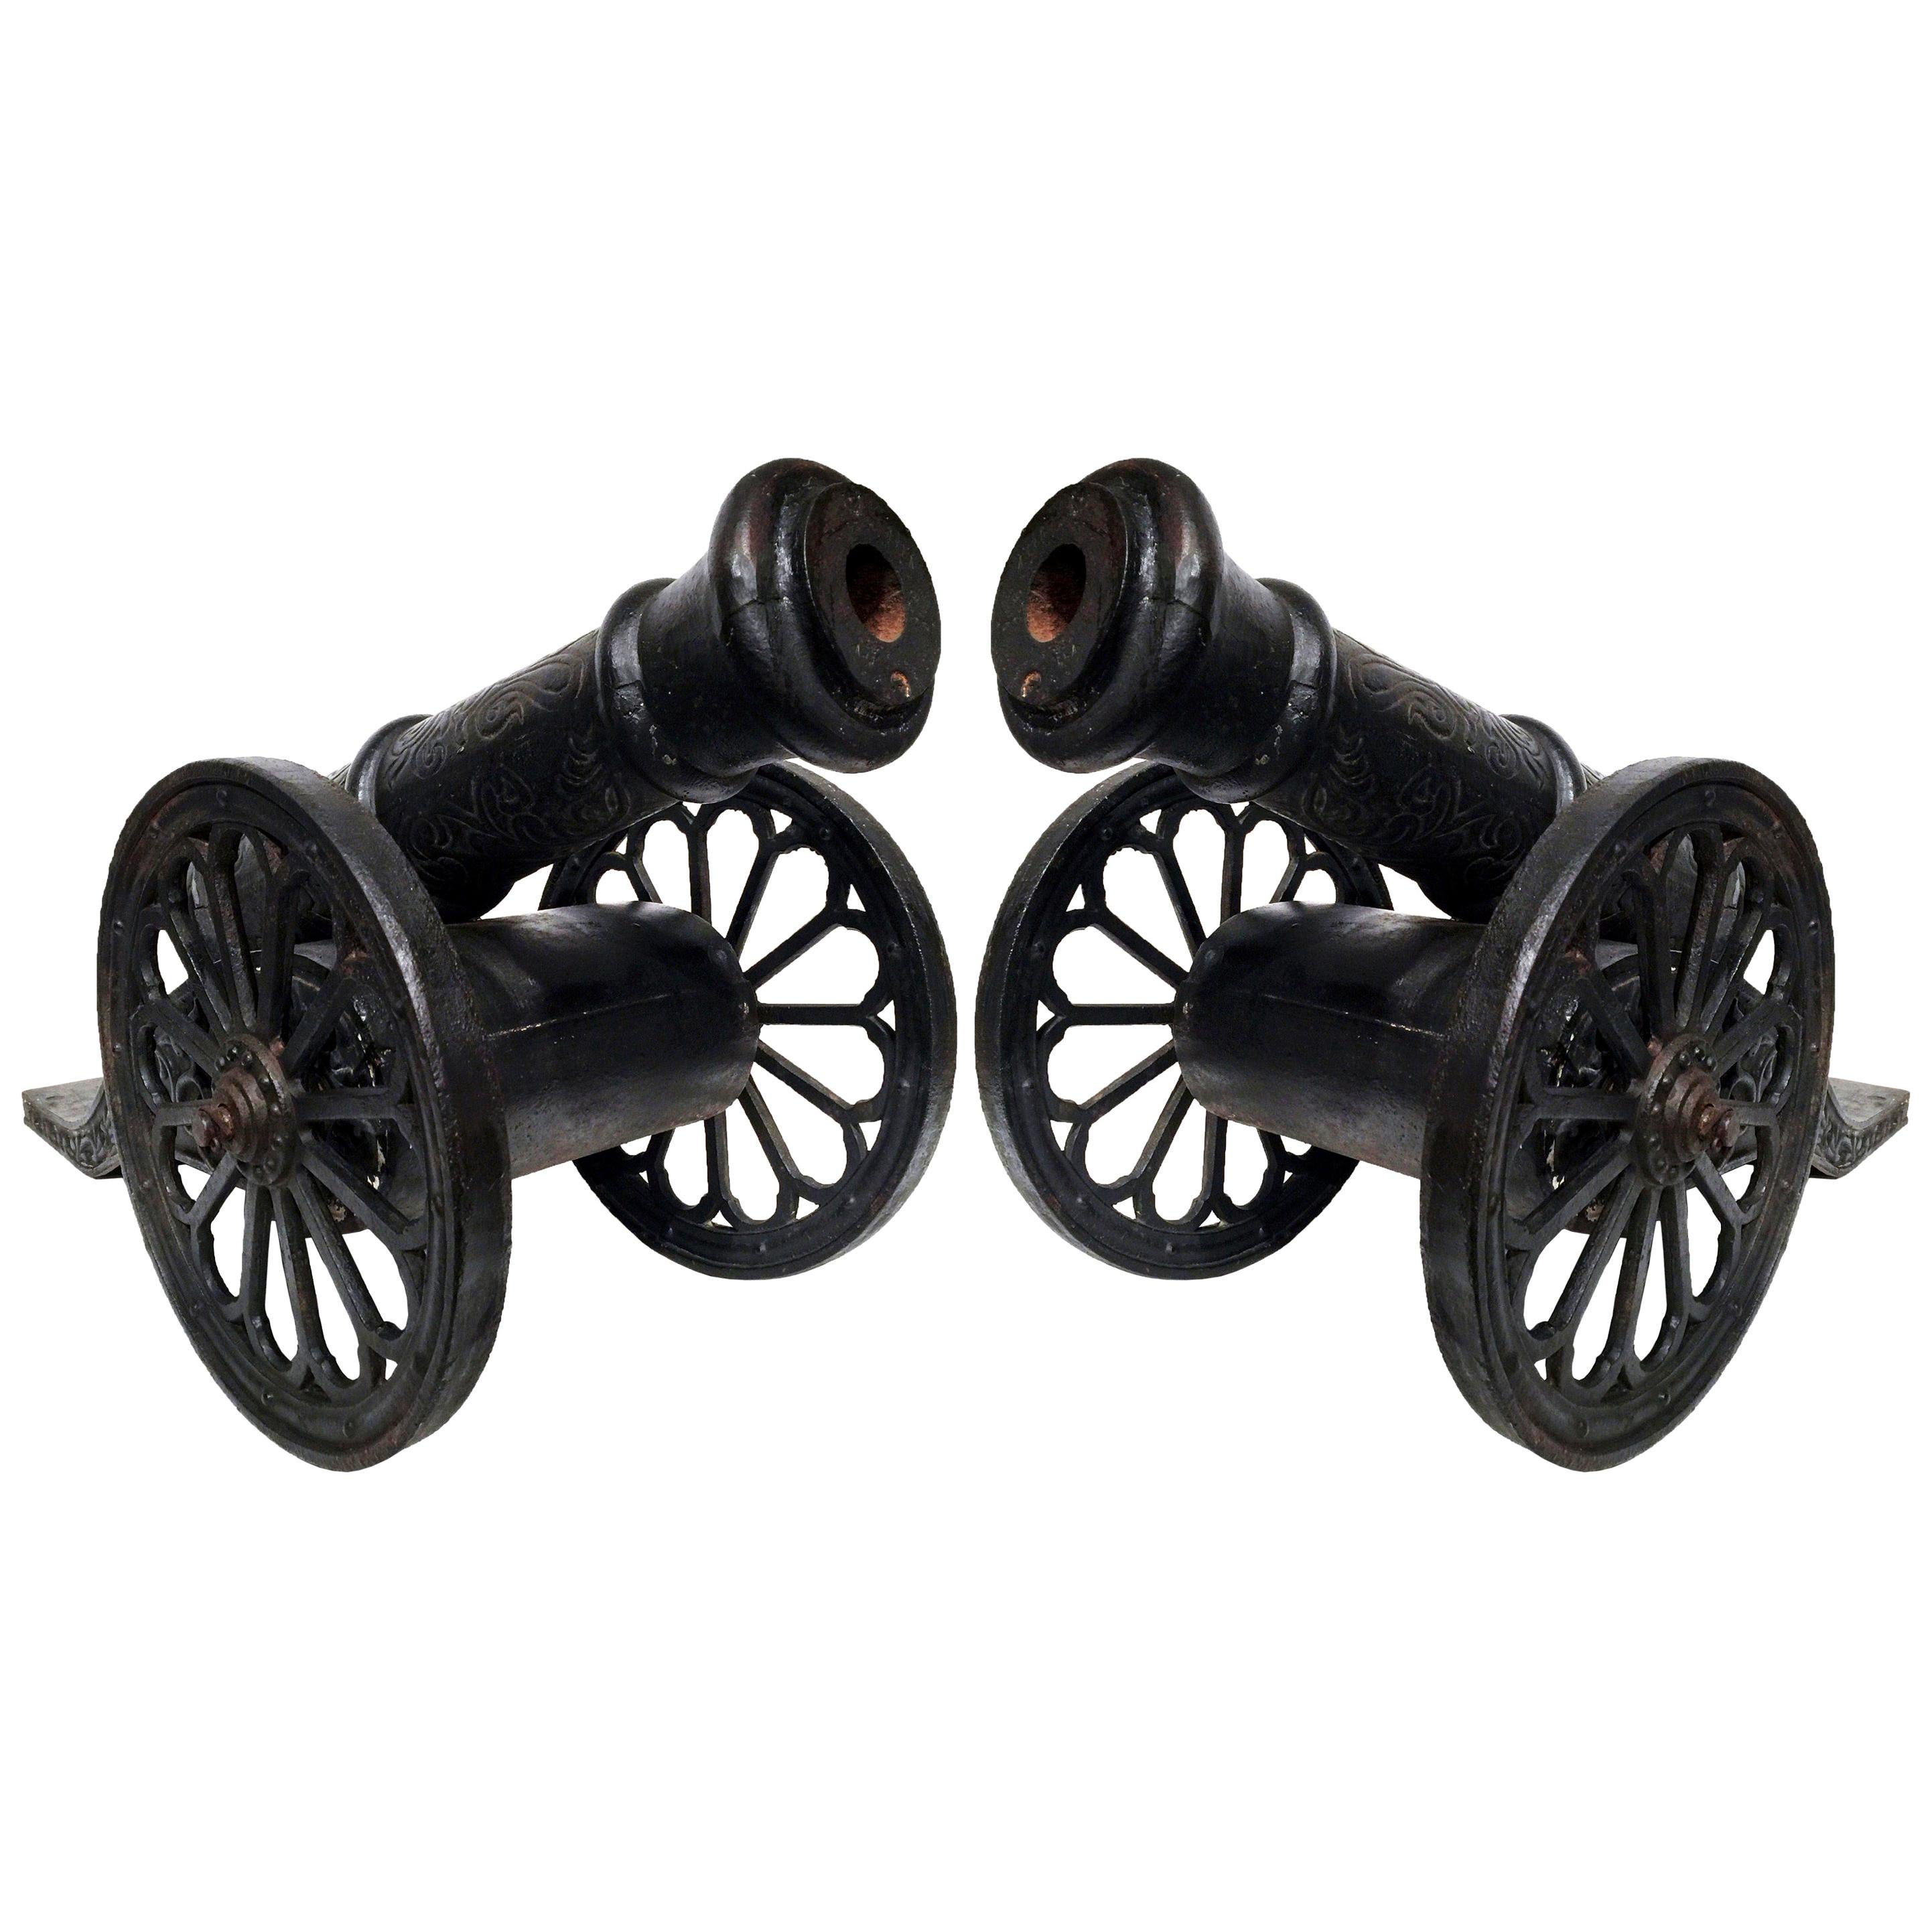 Pair of 18th Century French Patinated Decorative Wrought Iron Cannons on Wheels